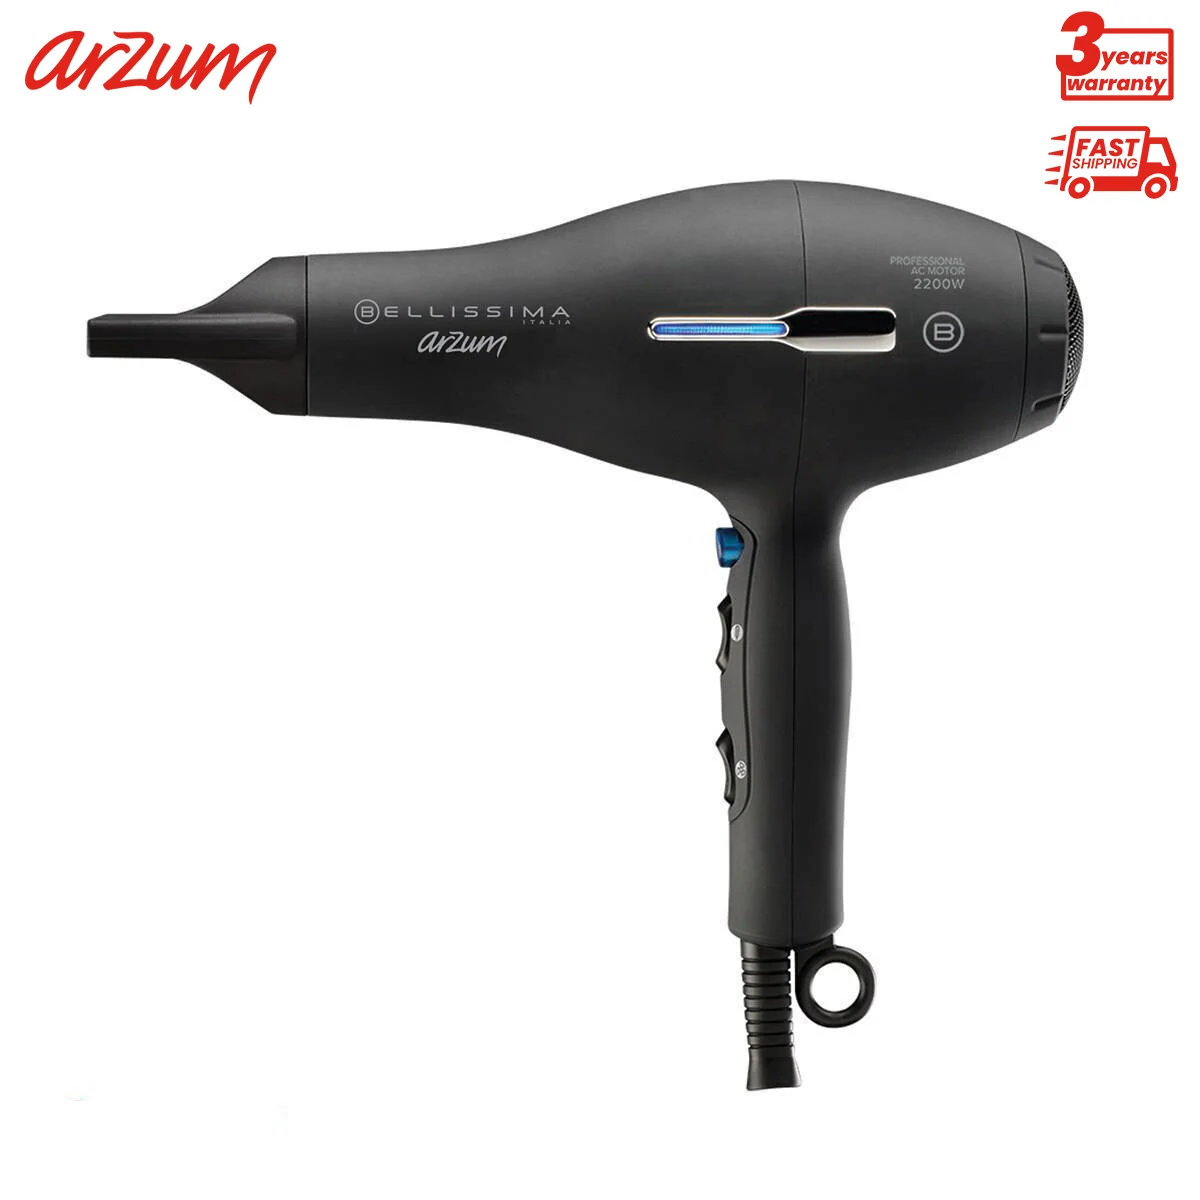 Arzum Include Belissima Professional Ionic Hair Dryer Electric Blow Dryer Professional Hairdressing Tools Hair Styling